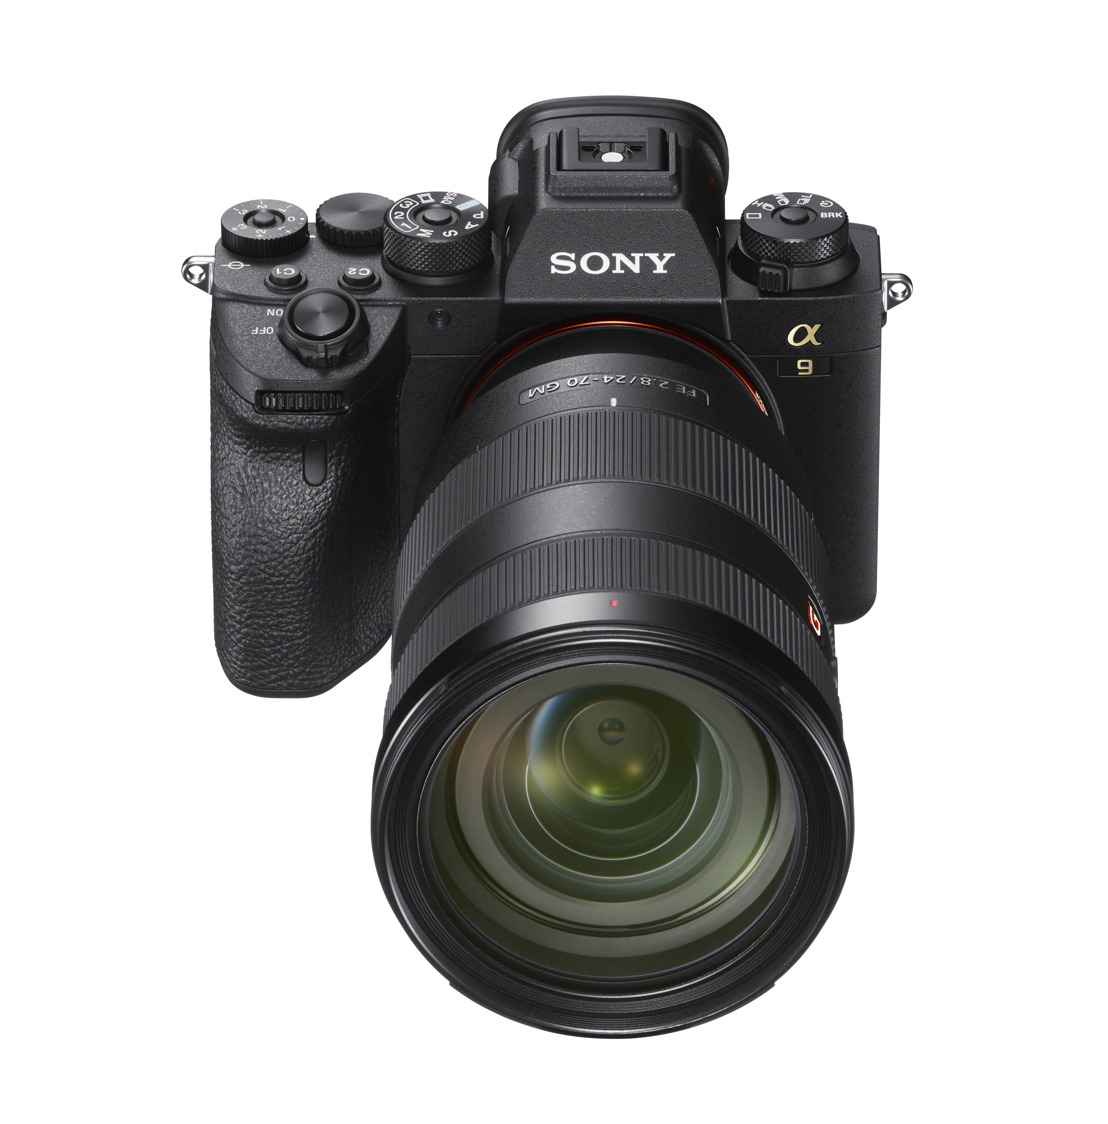 Sony Electronics Announces New Camera Software Development Kit (SDK) for Third Party Developers and Integrators